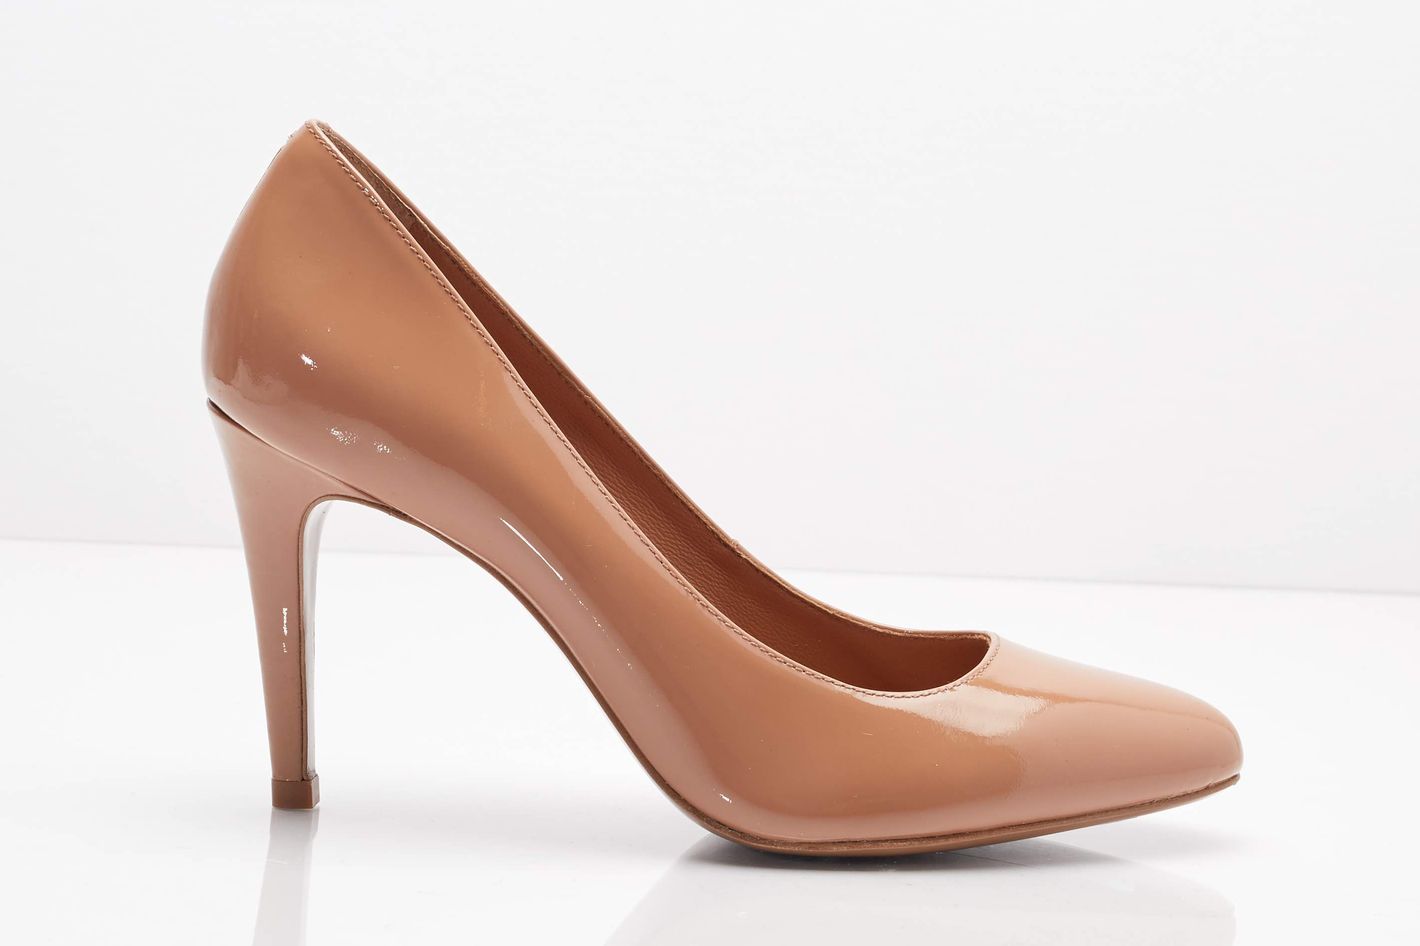 New Brand Has Nude Shoes for All Skin Tones